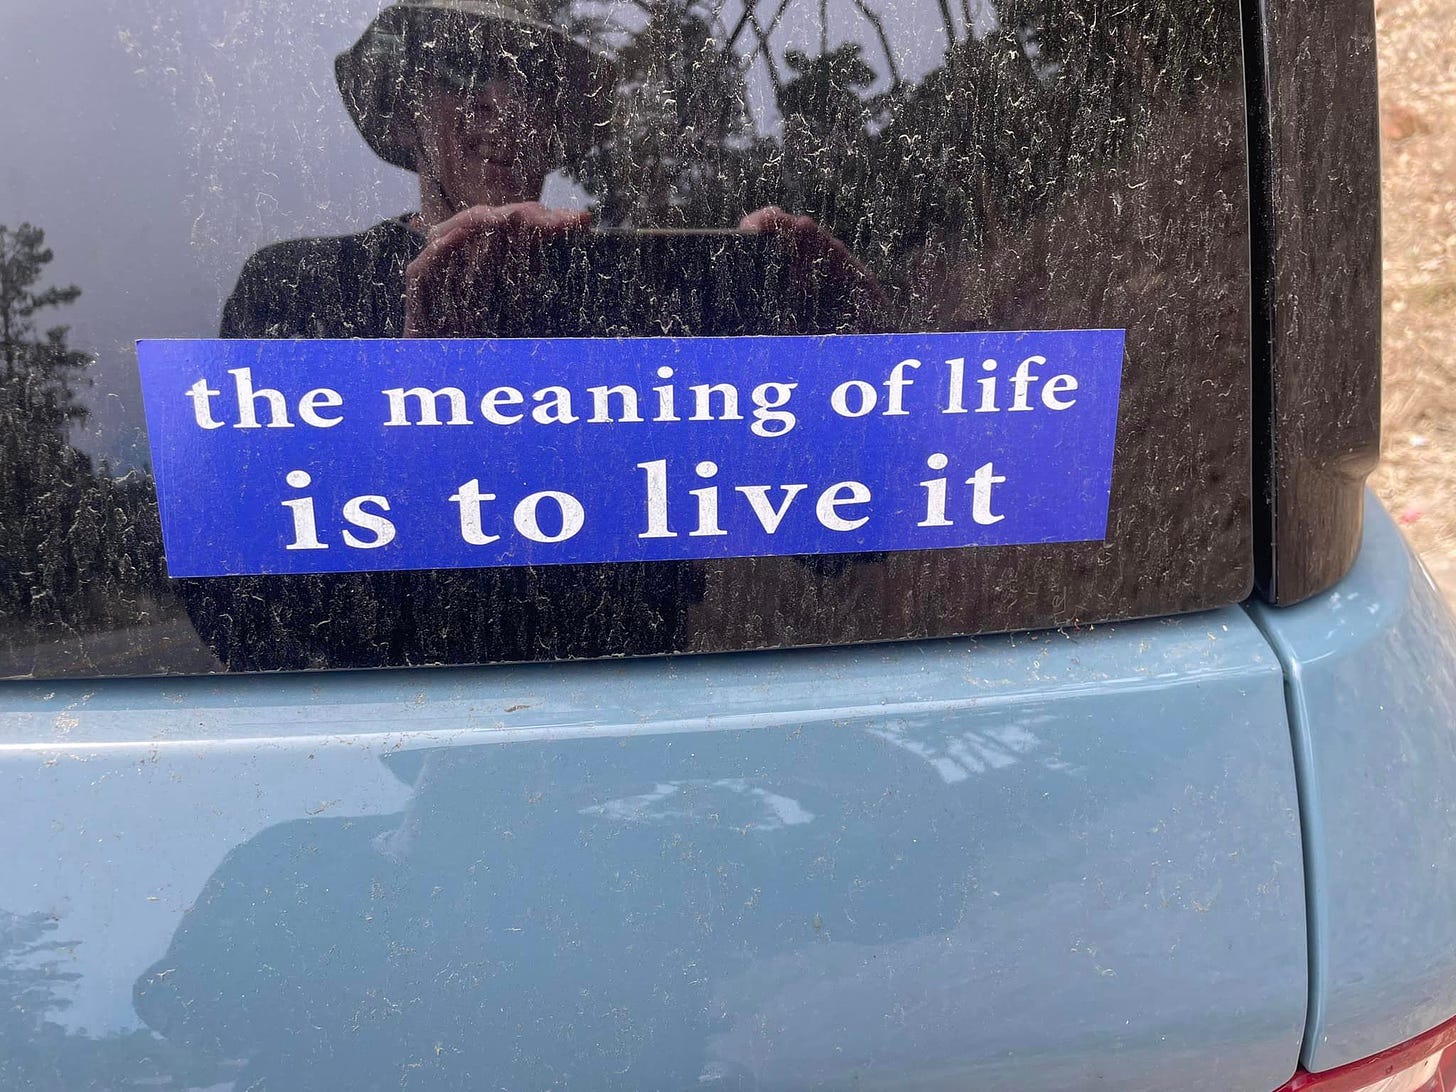 May be an image of text that says 'the meaning of life is to live it'